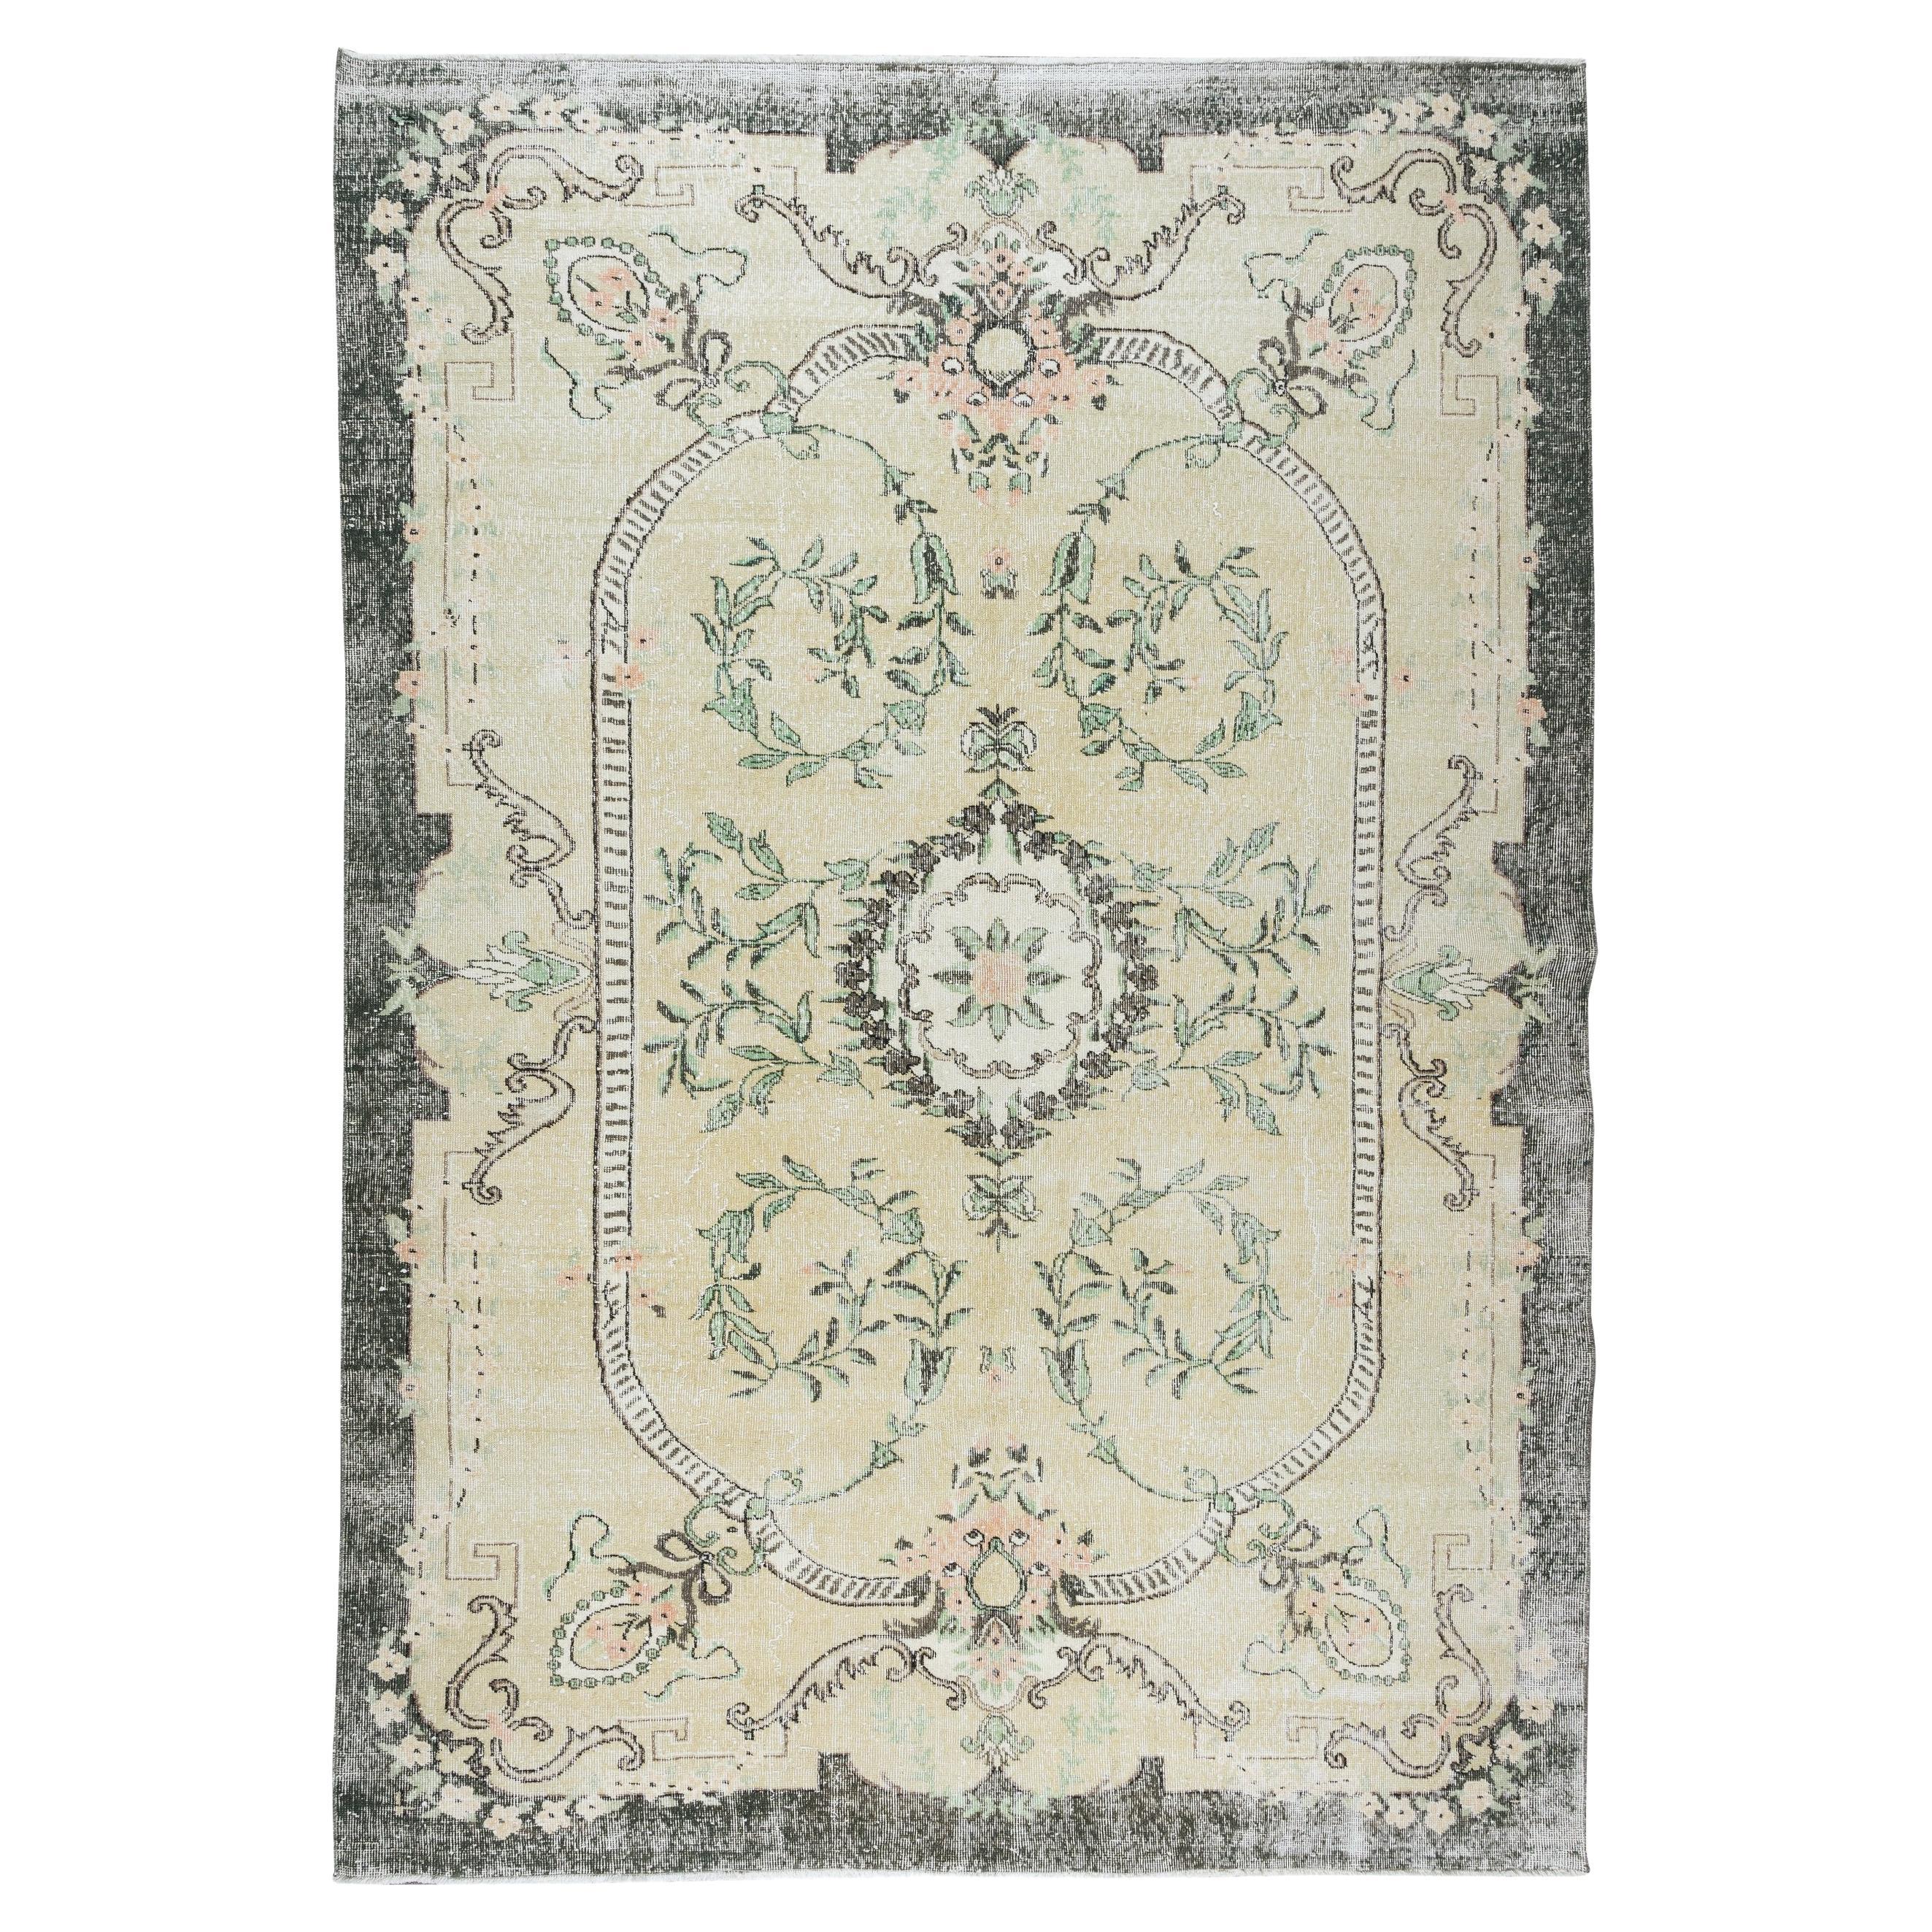 7x10 Ft Hand-Knotted Vintage Turkish Oushak Wool Area Rug with Medallion Design